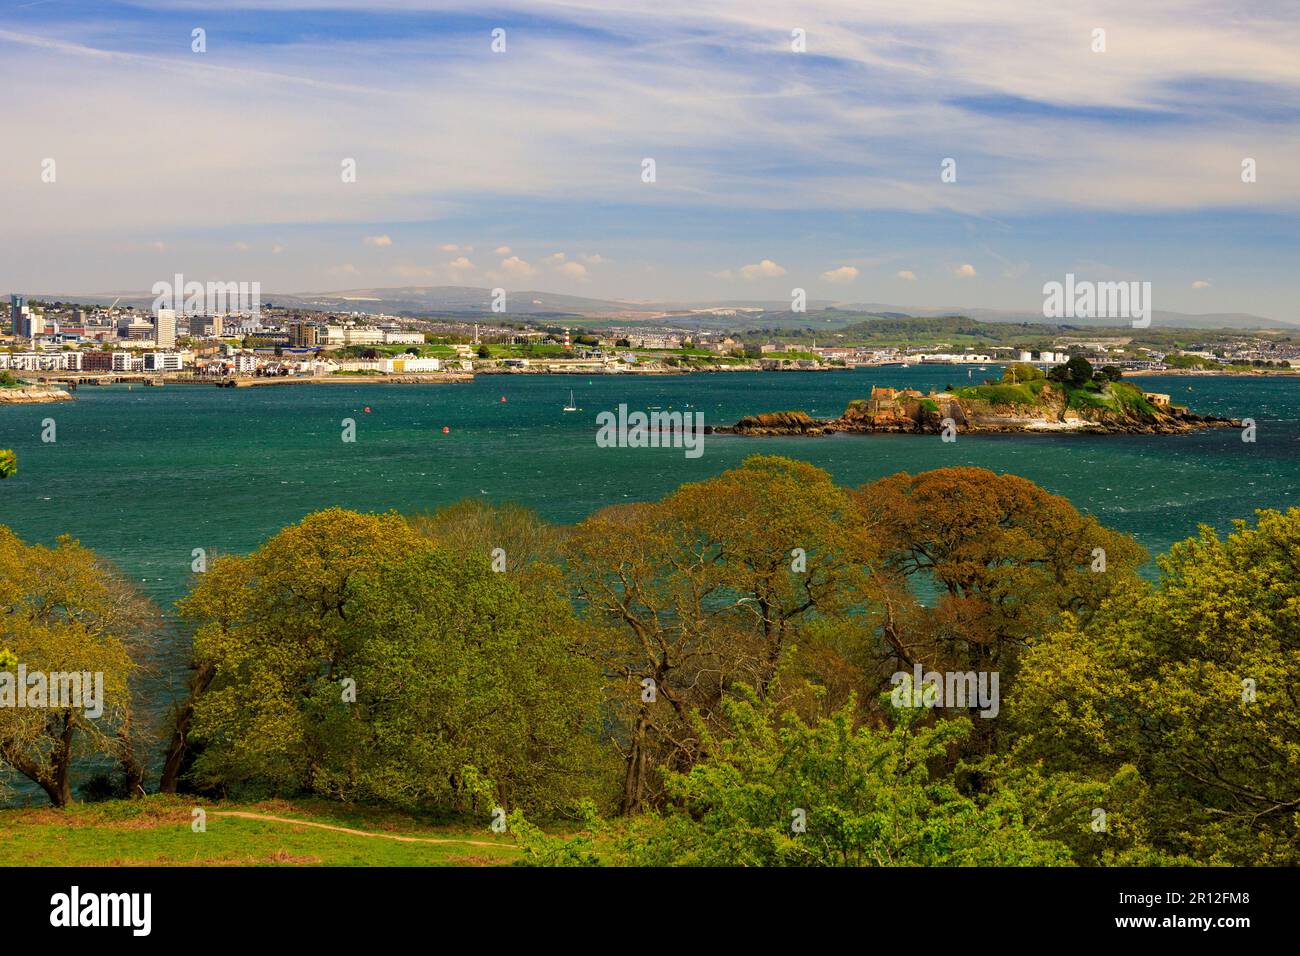 Looking across the River Tamar towards the Plymouth waterfront and Drake's Island from the Mount Edgcumbe Country Park, Cornwall, England, UK Stock Photo